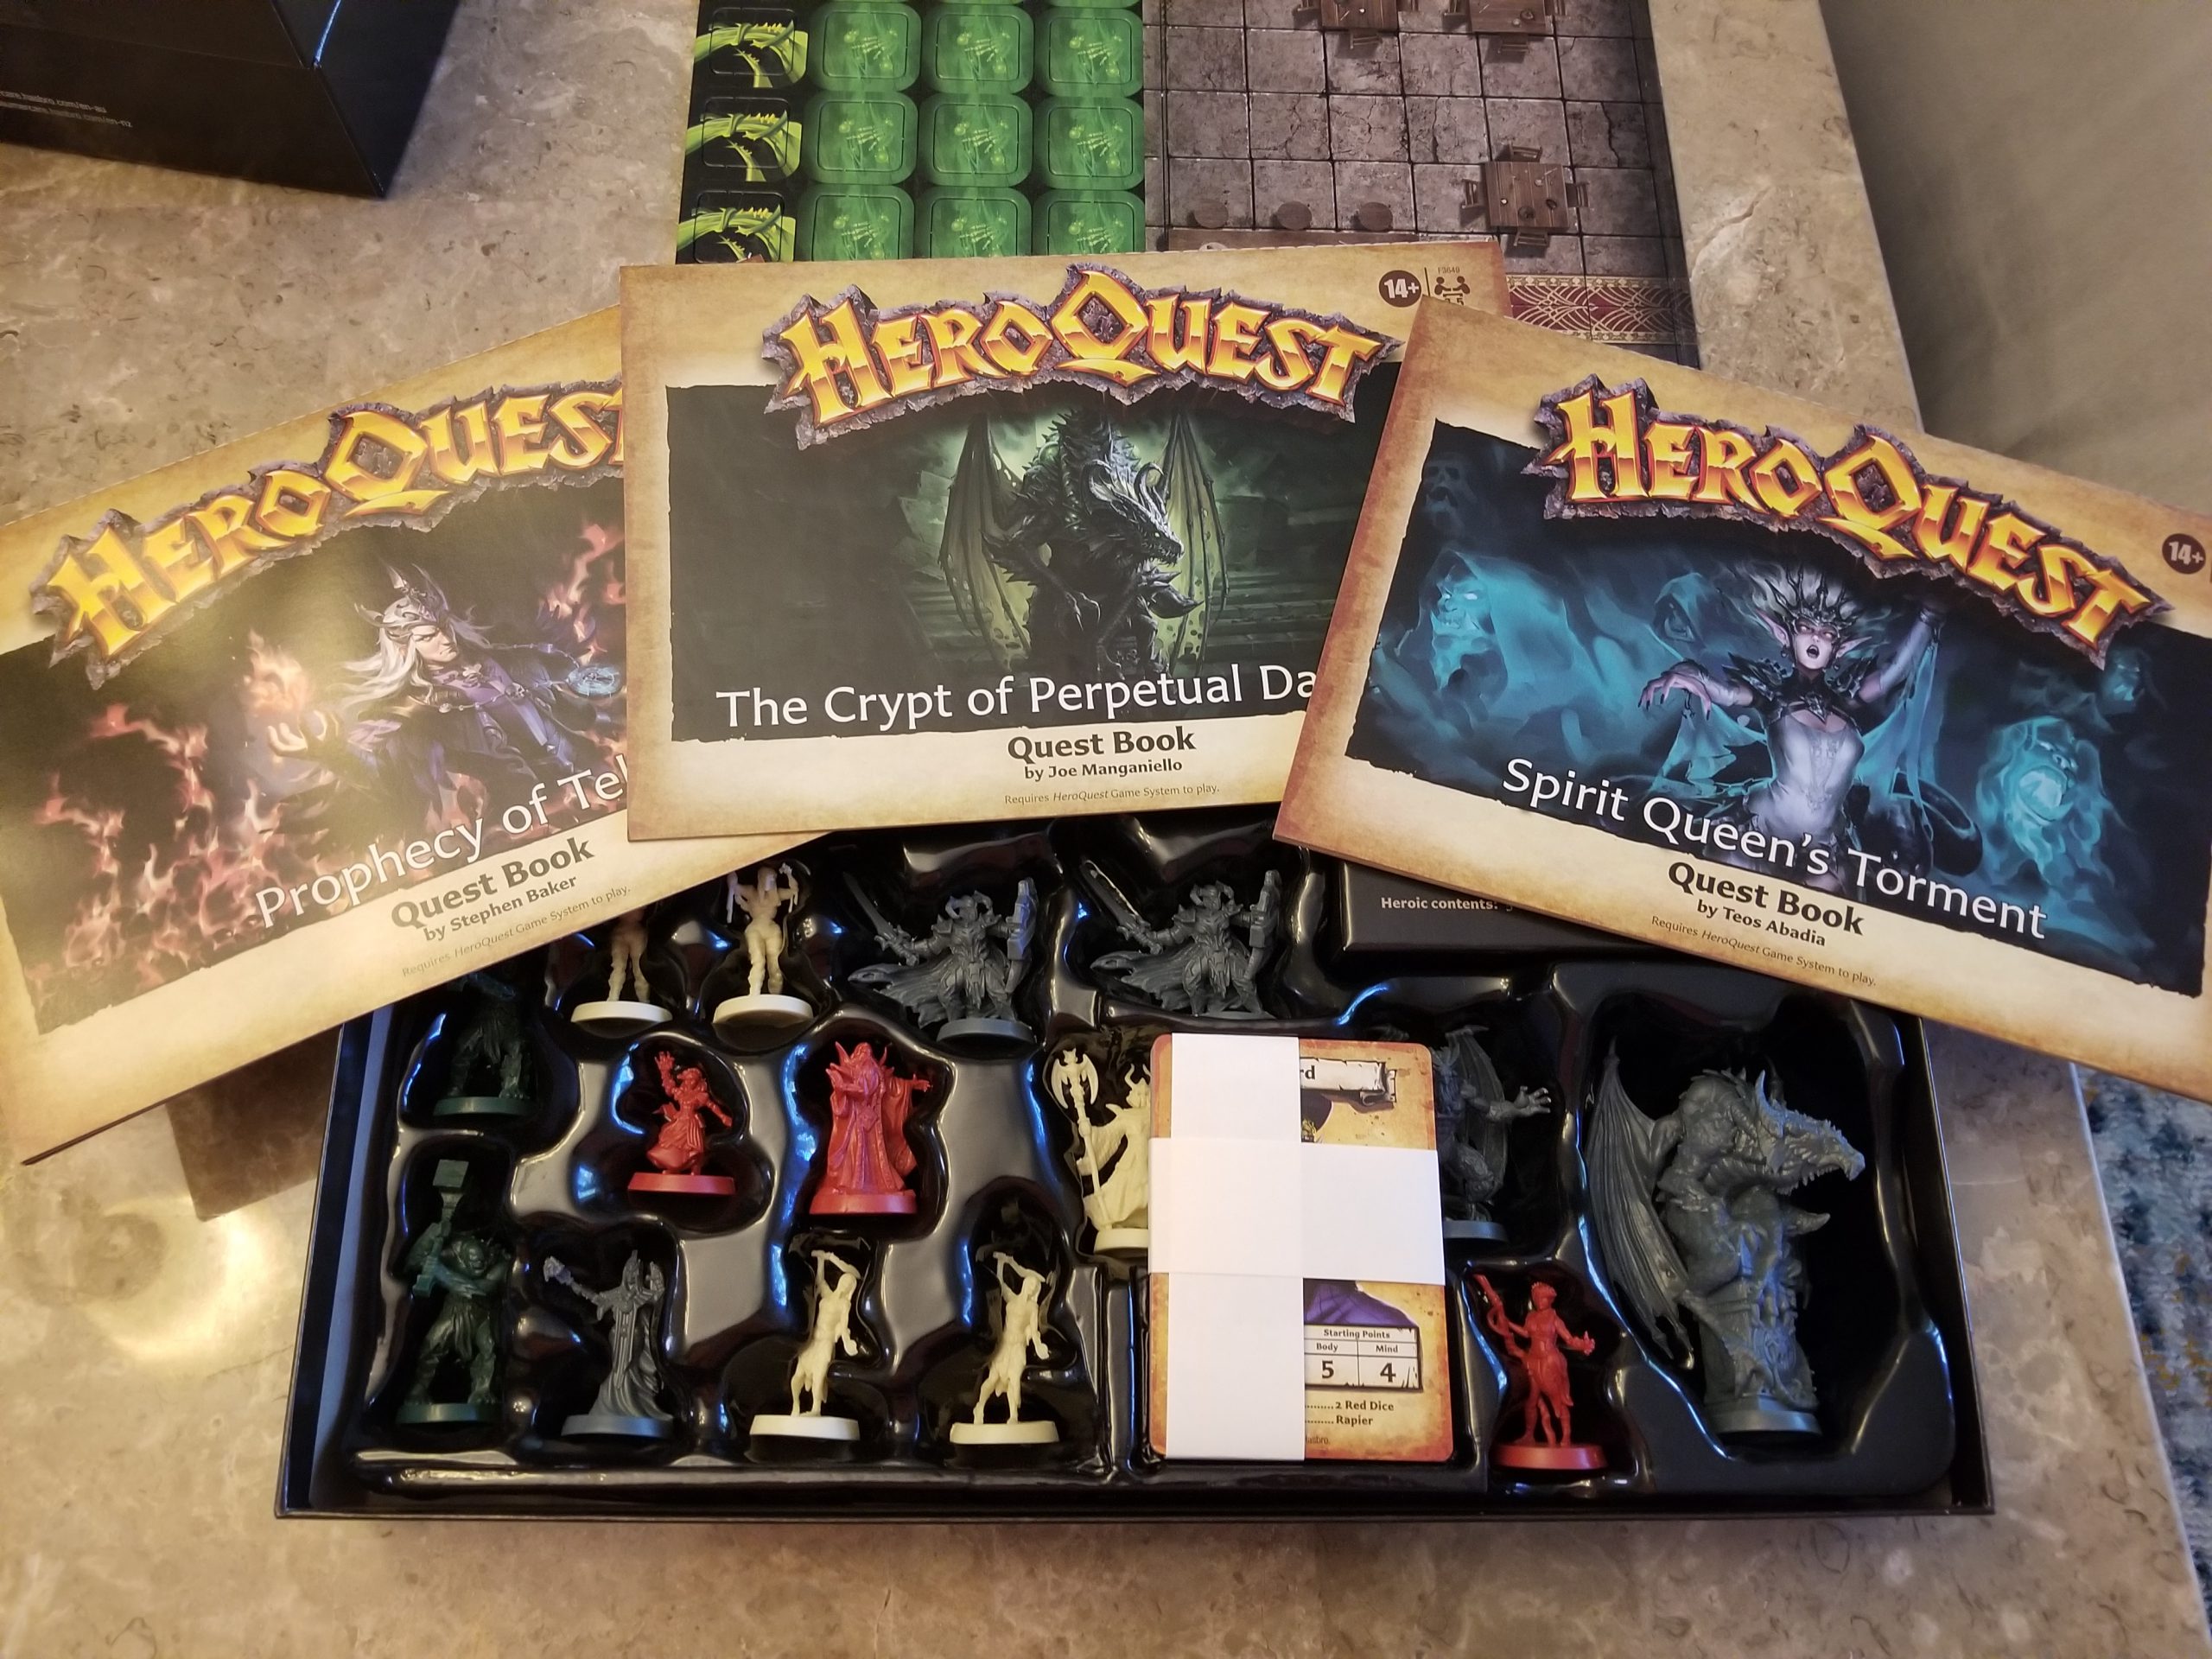 30 years on, fantasy board game HeroQuest is still inspiring